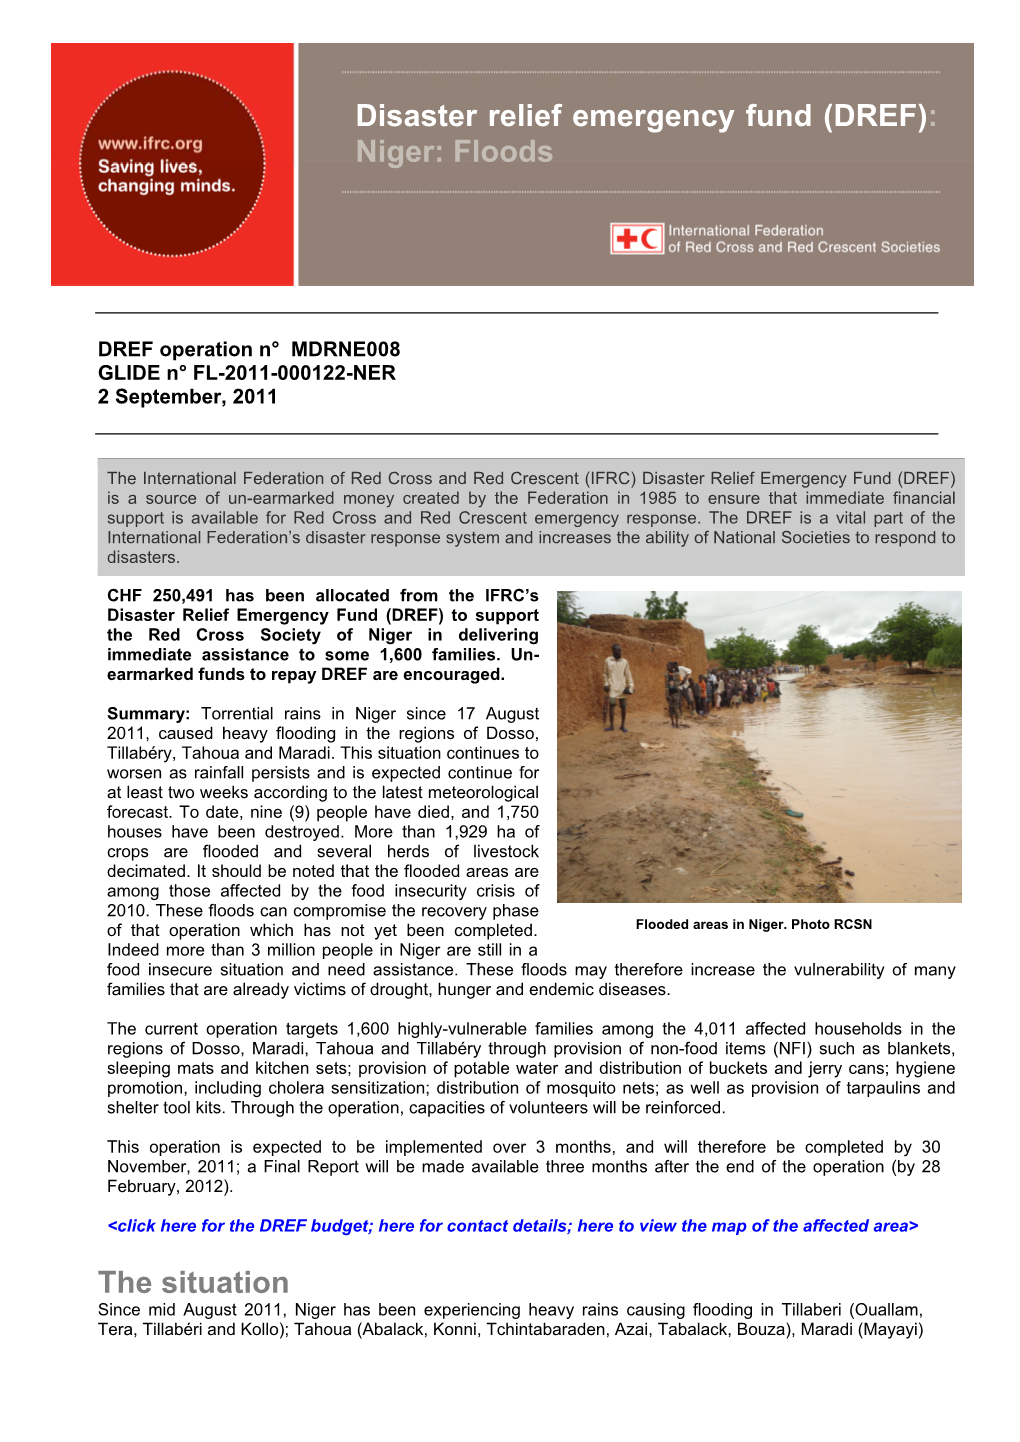 Disaster Relief Emergency Fund (DREF): Niger: Floods the Situation